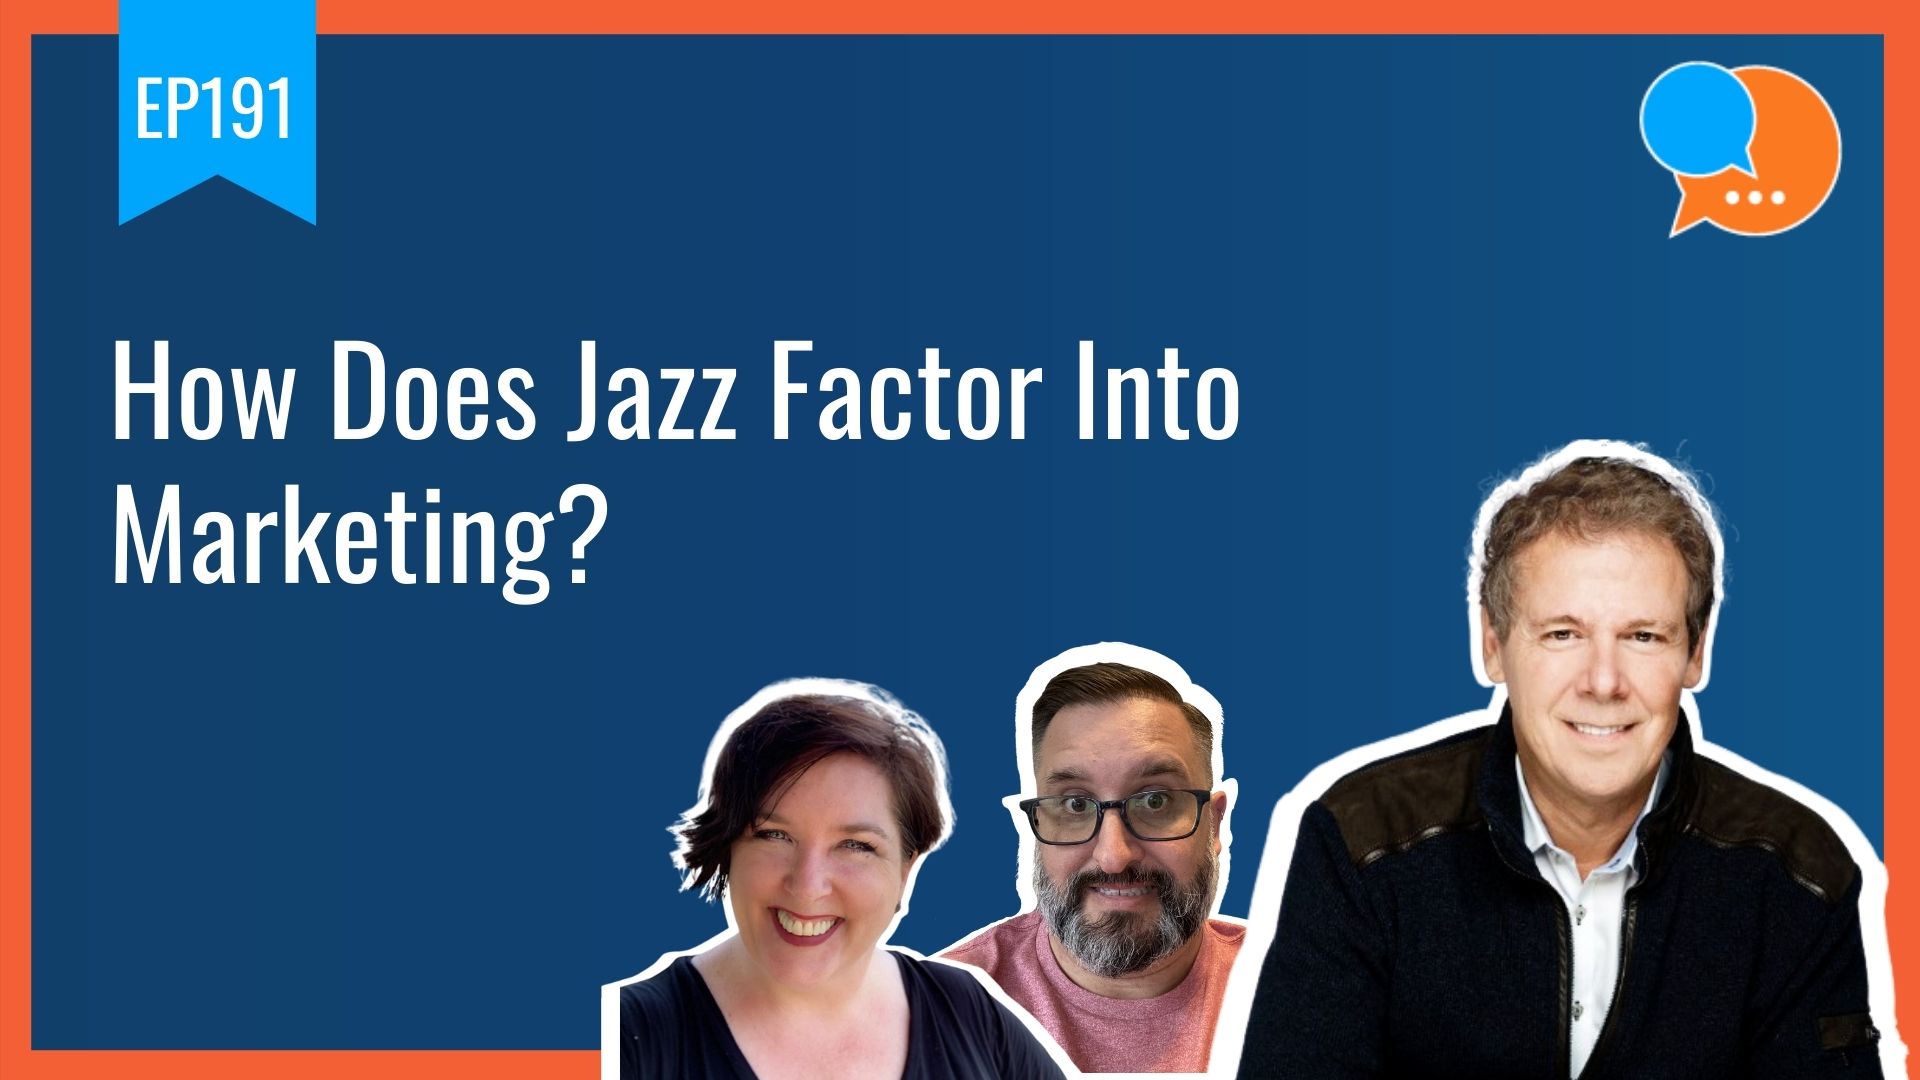 EP191 – How Does Jazz Factor Into Marketing